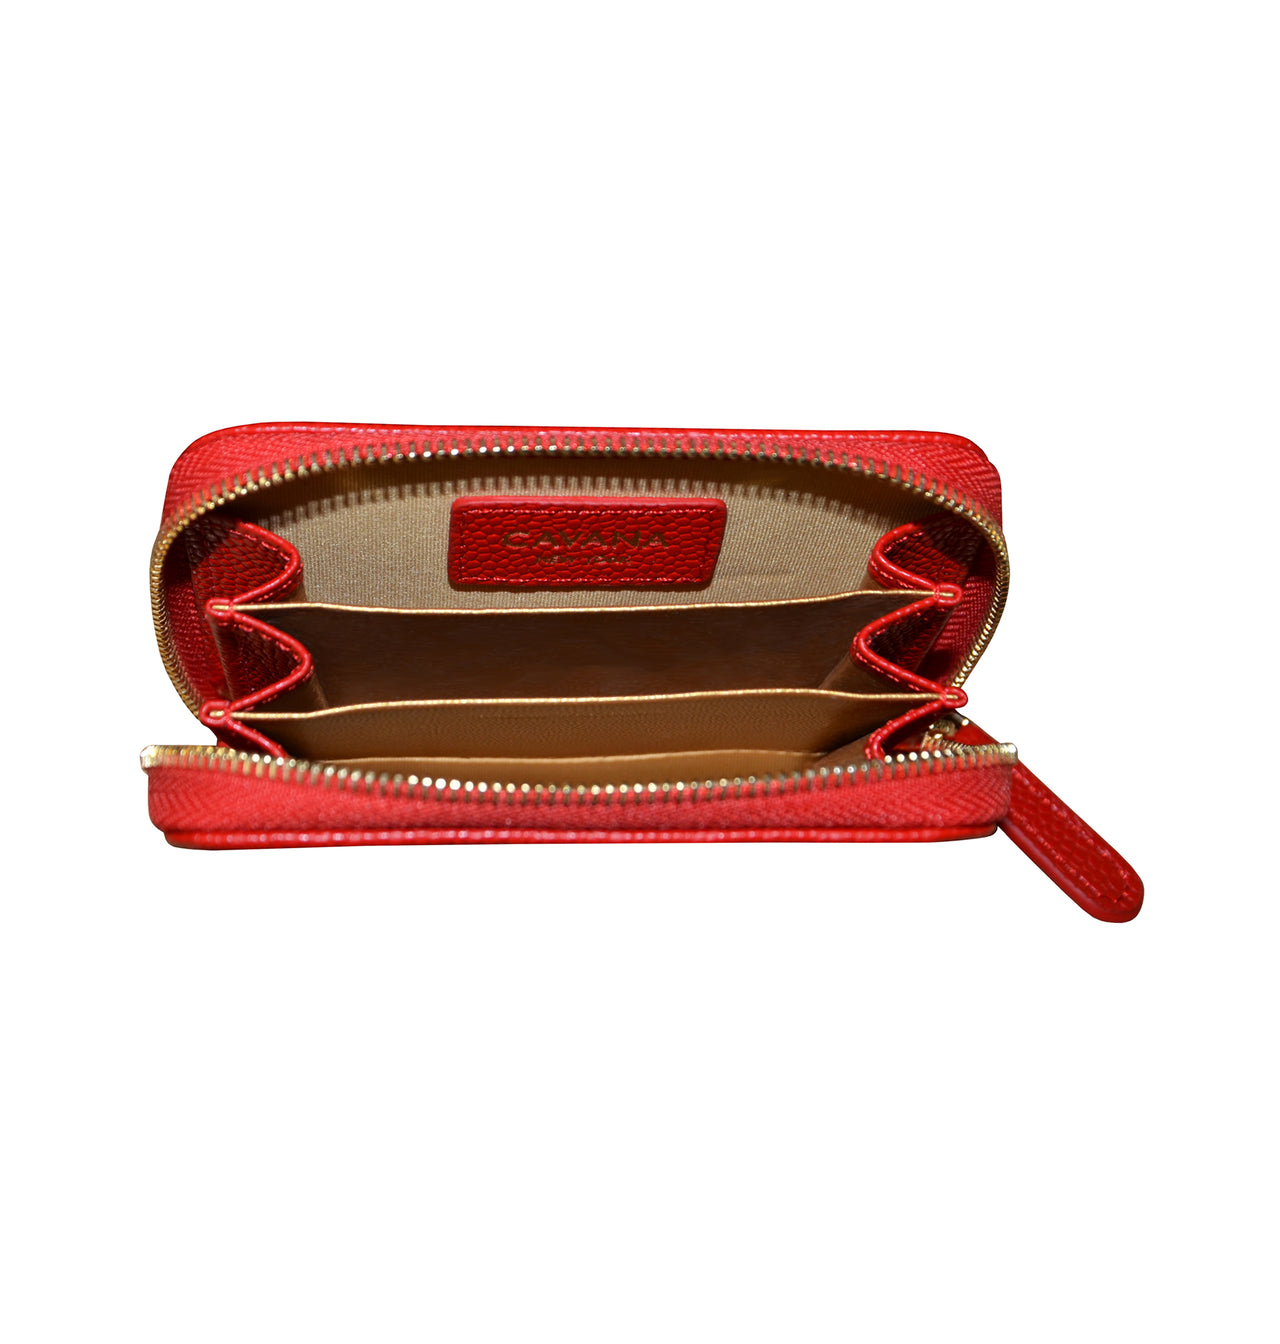 ZIPPY COIN PURSE IN RED